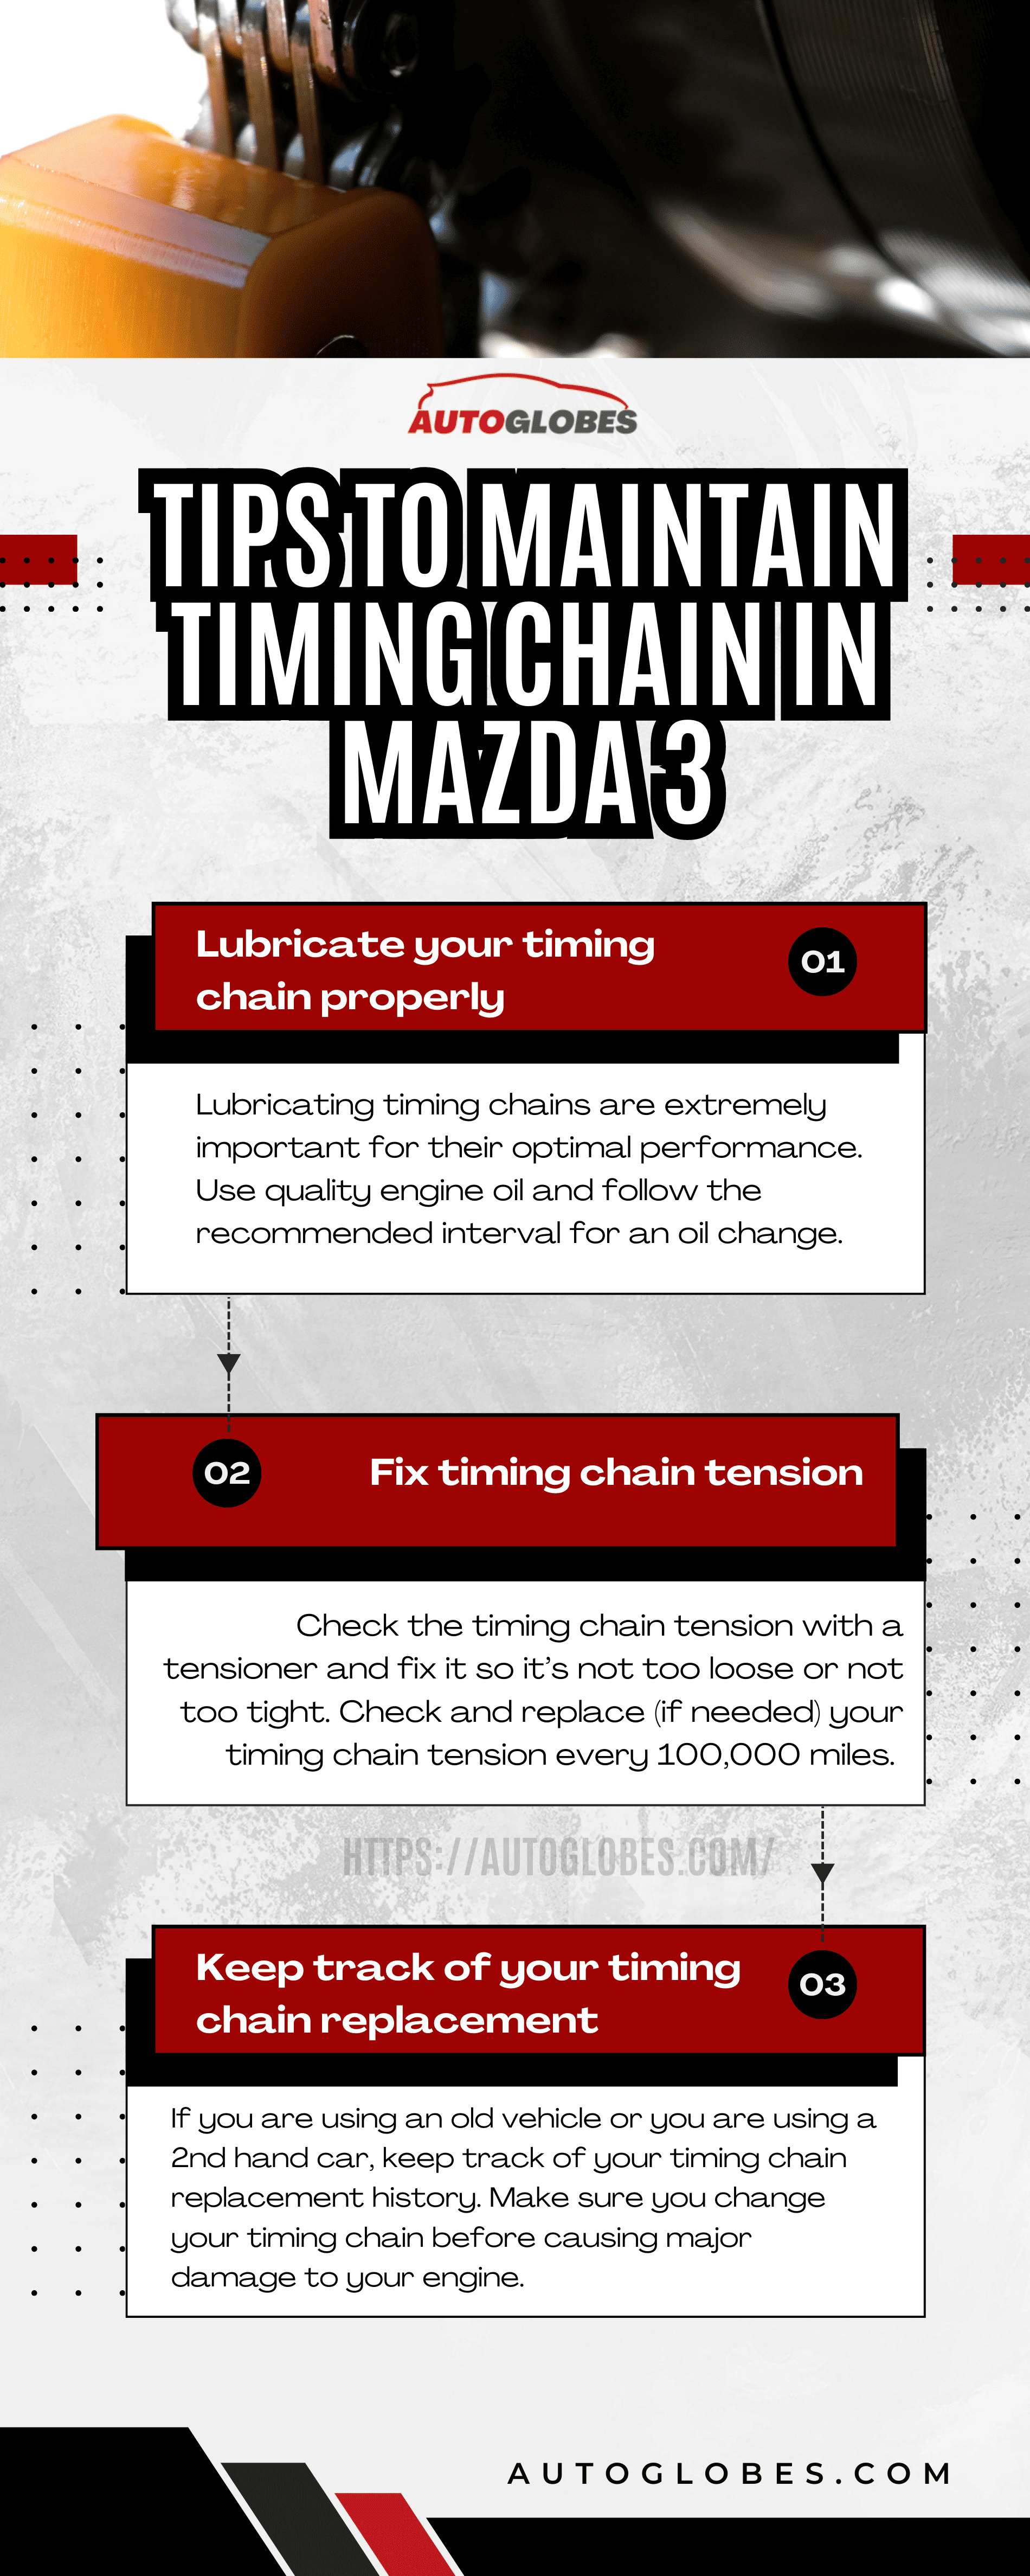 Tips To Maintain Timing Chain In Mazda 3 Infographic